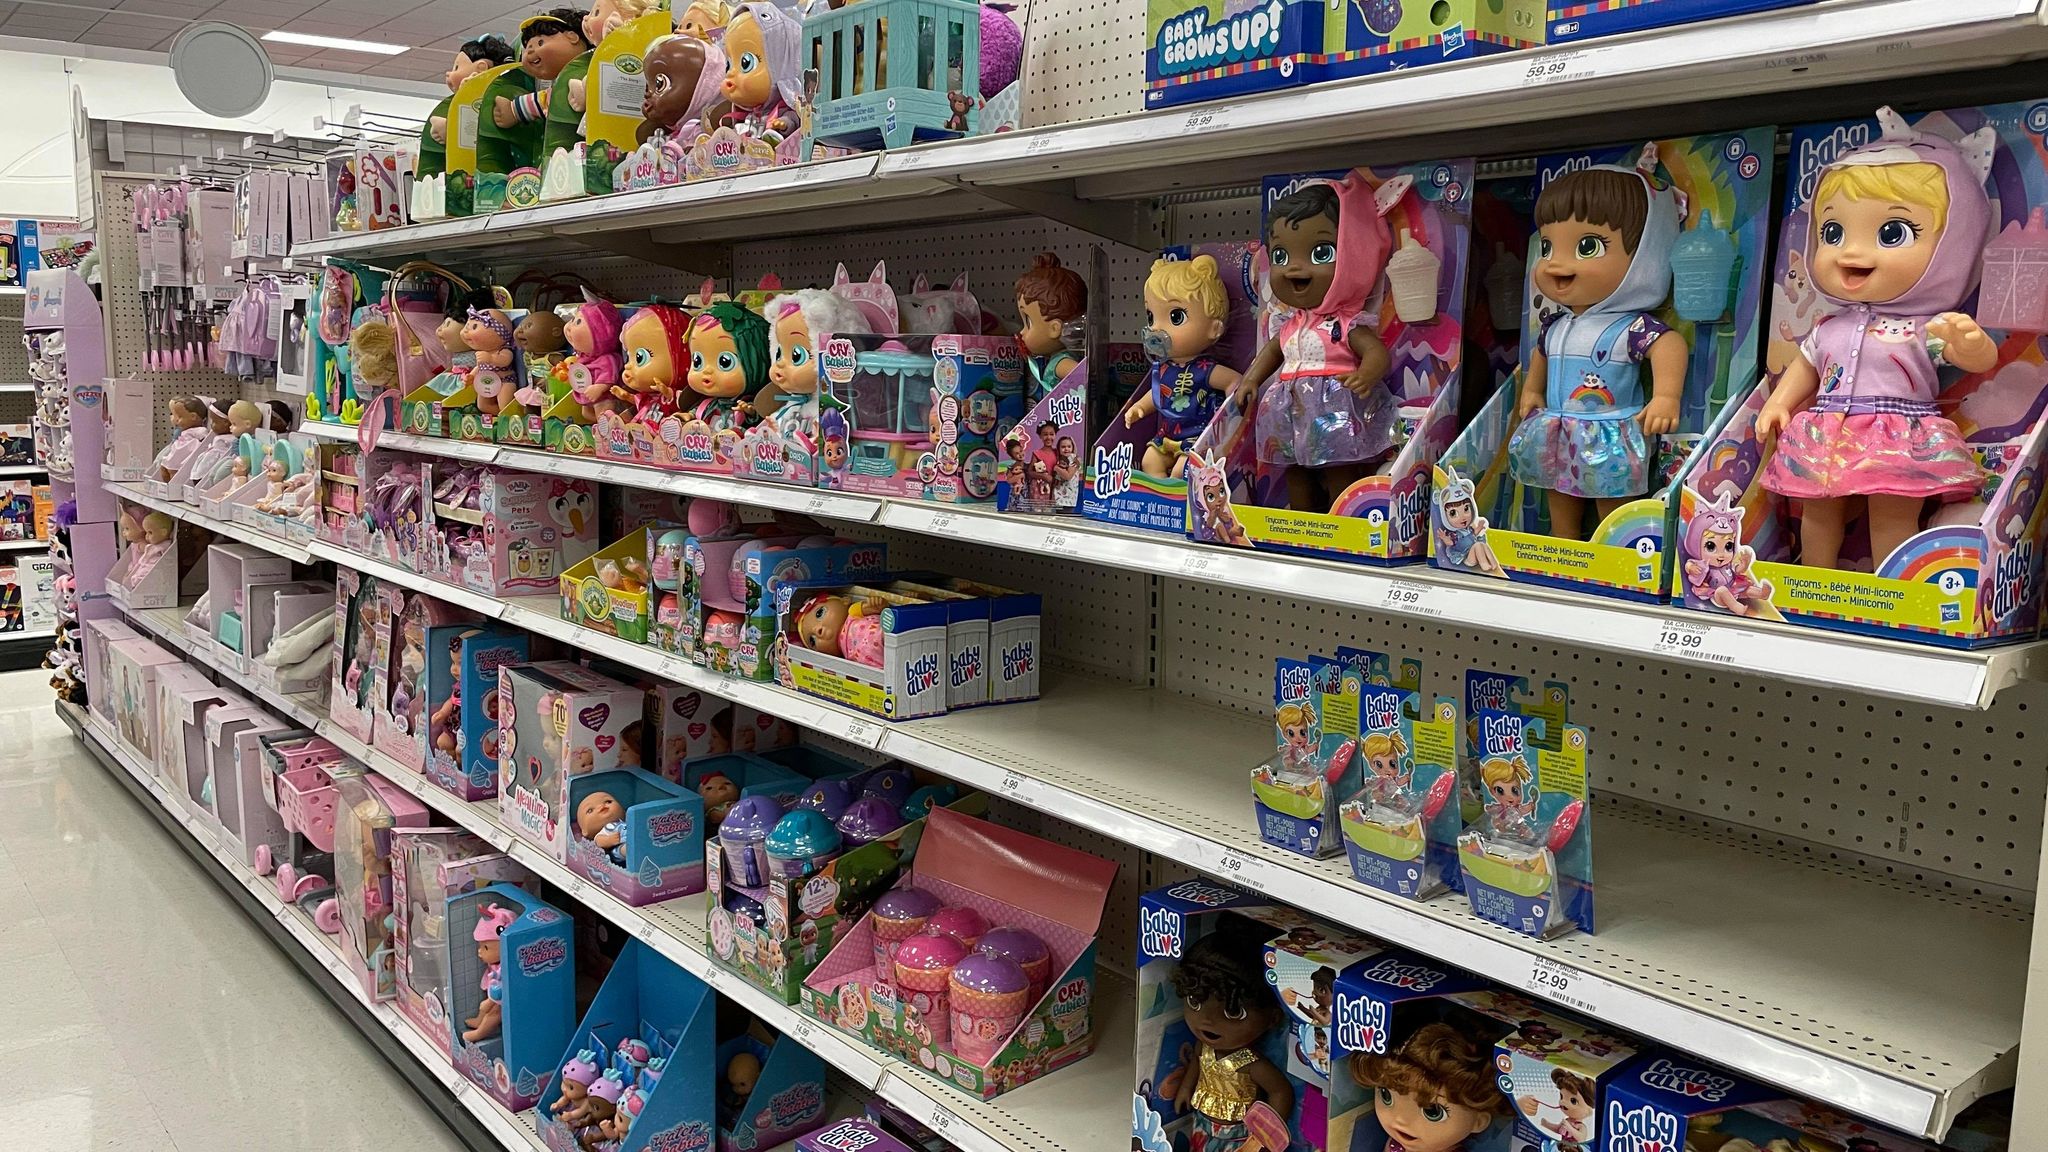 EPIC TOY CLEARANCE EVENT AT WALMART!!! 🤩🚂✨ Have you spotted